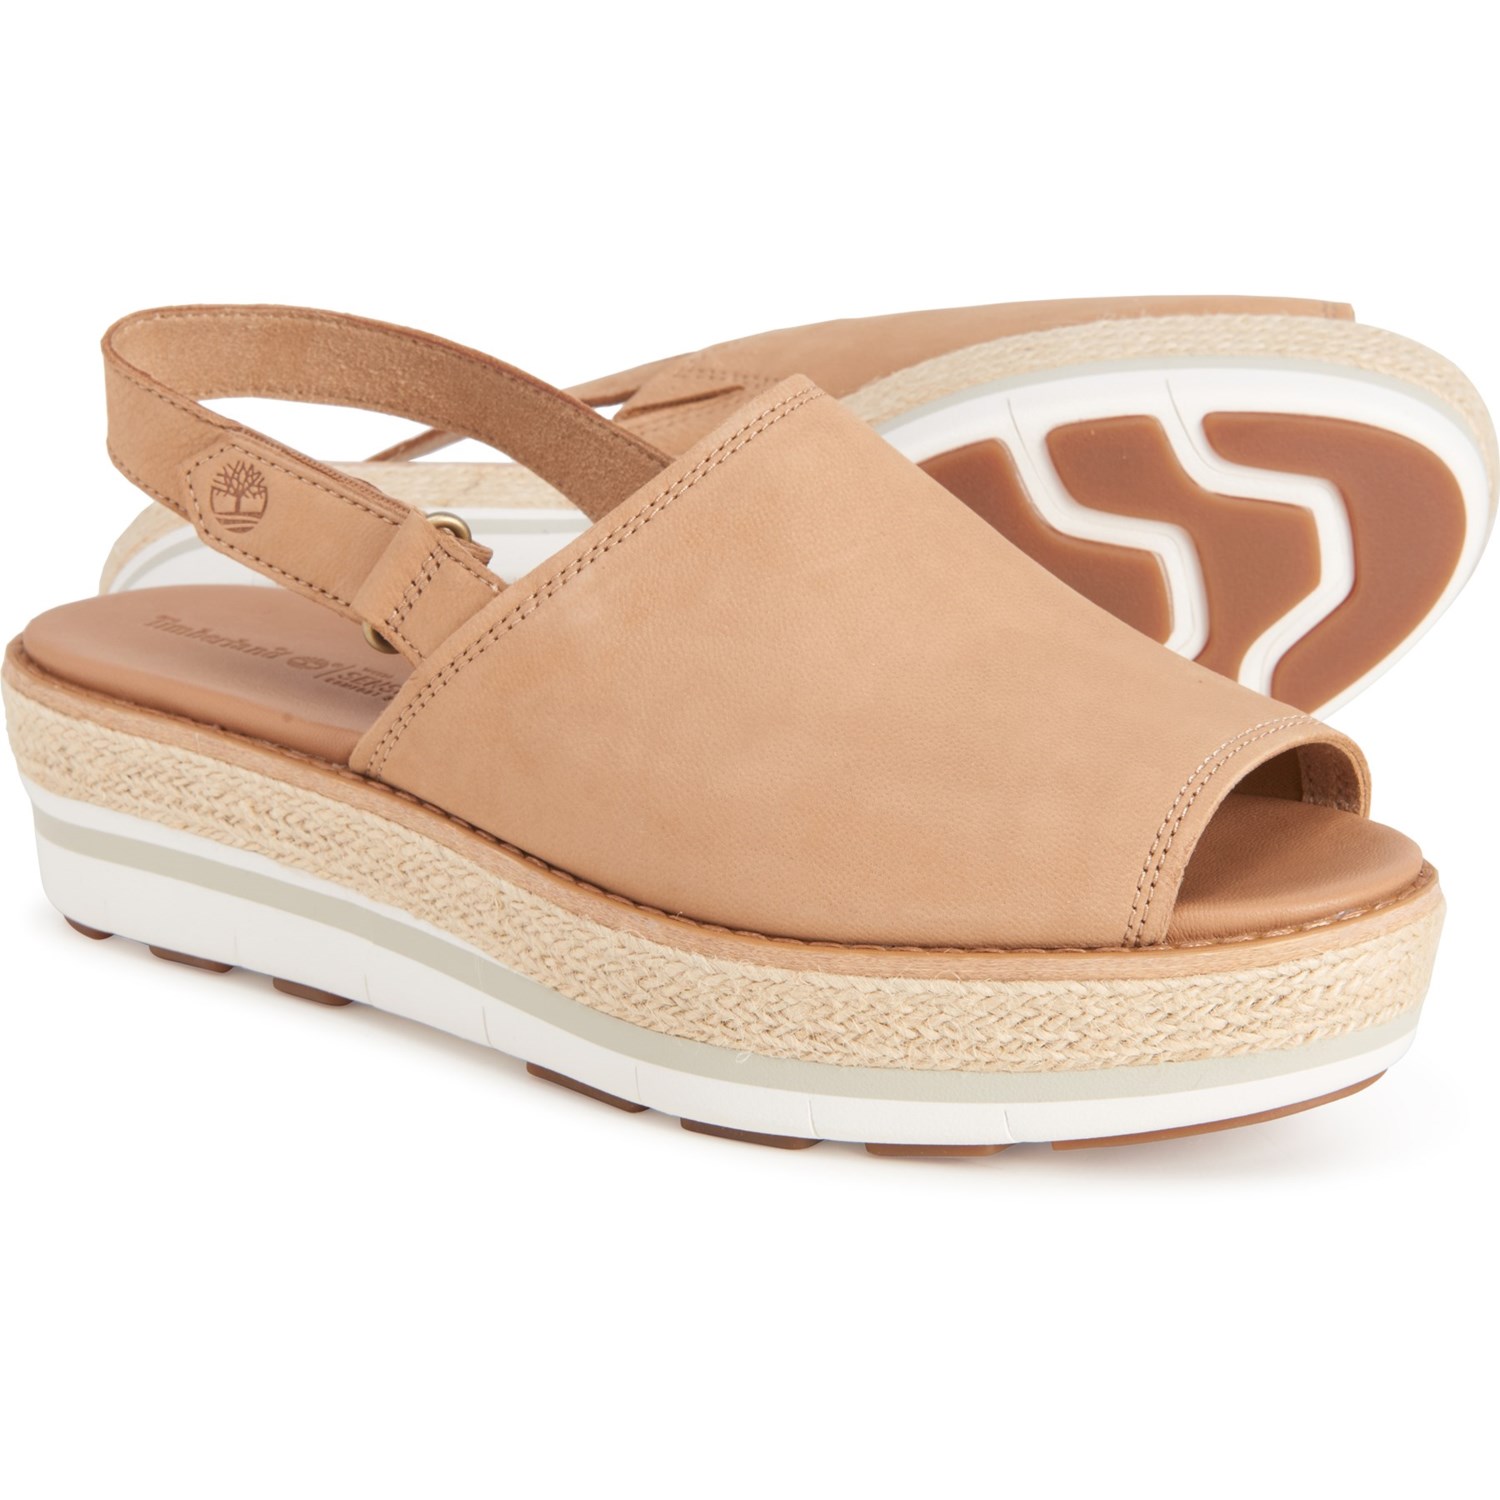 timberland women's emerson point closed toe sandal